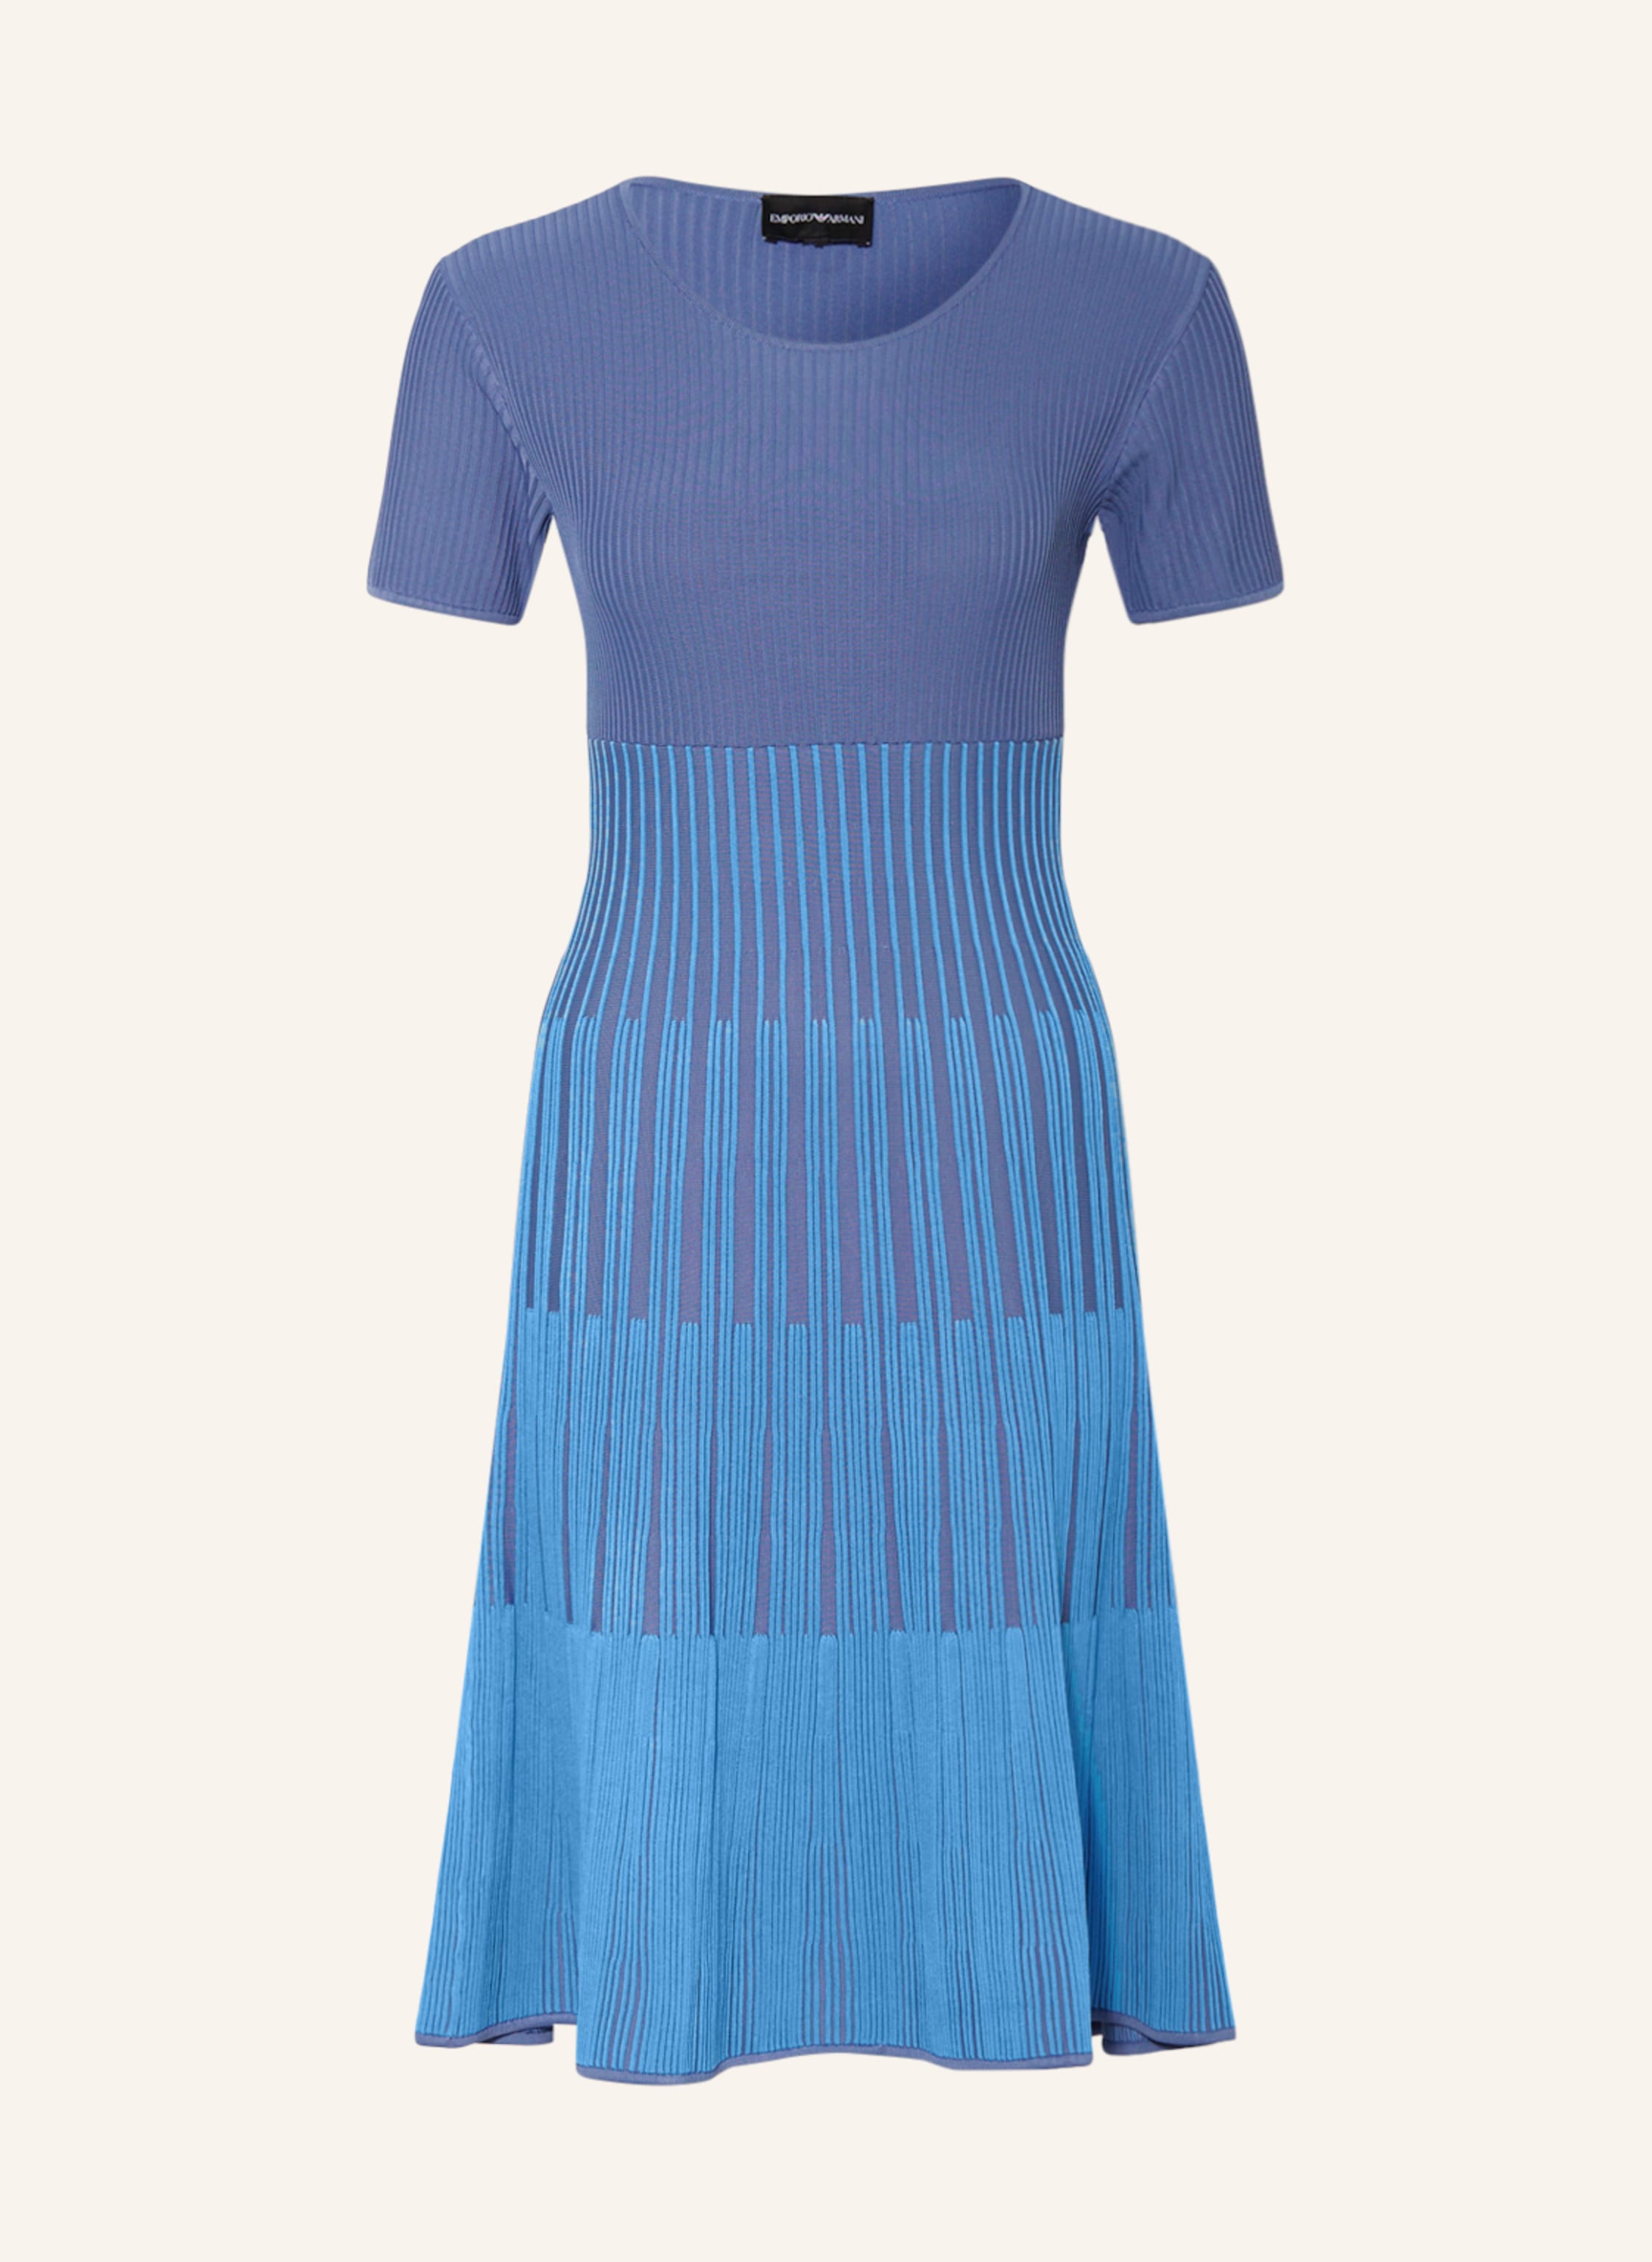 EMPORIO ARMANI Knit dress in blue/ taupe | Breuninger